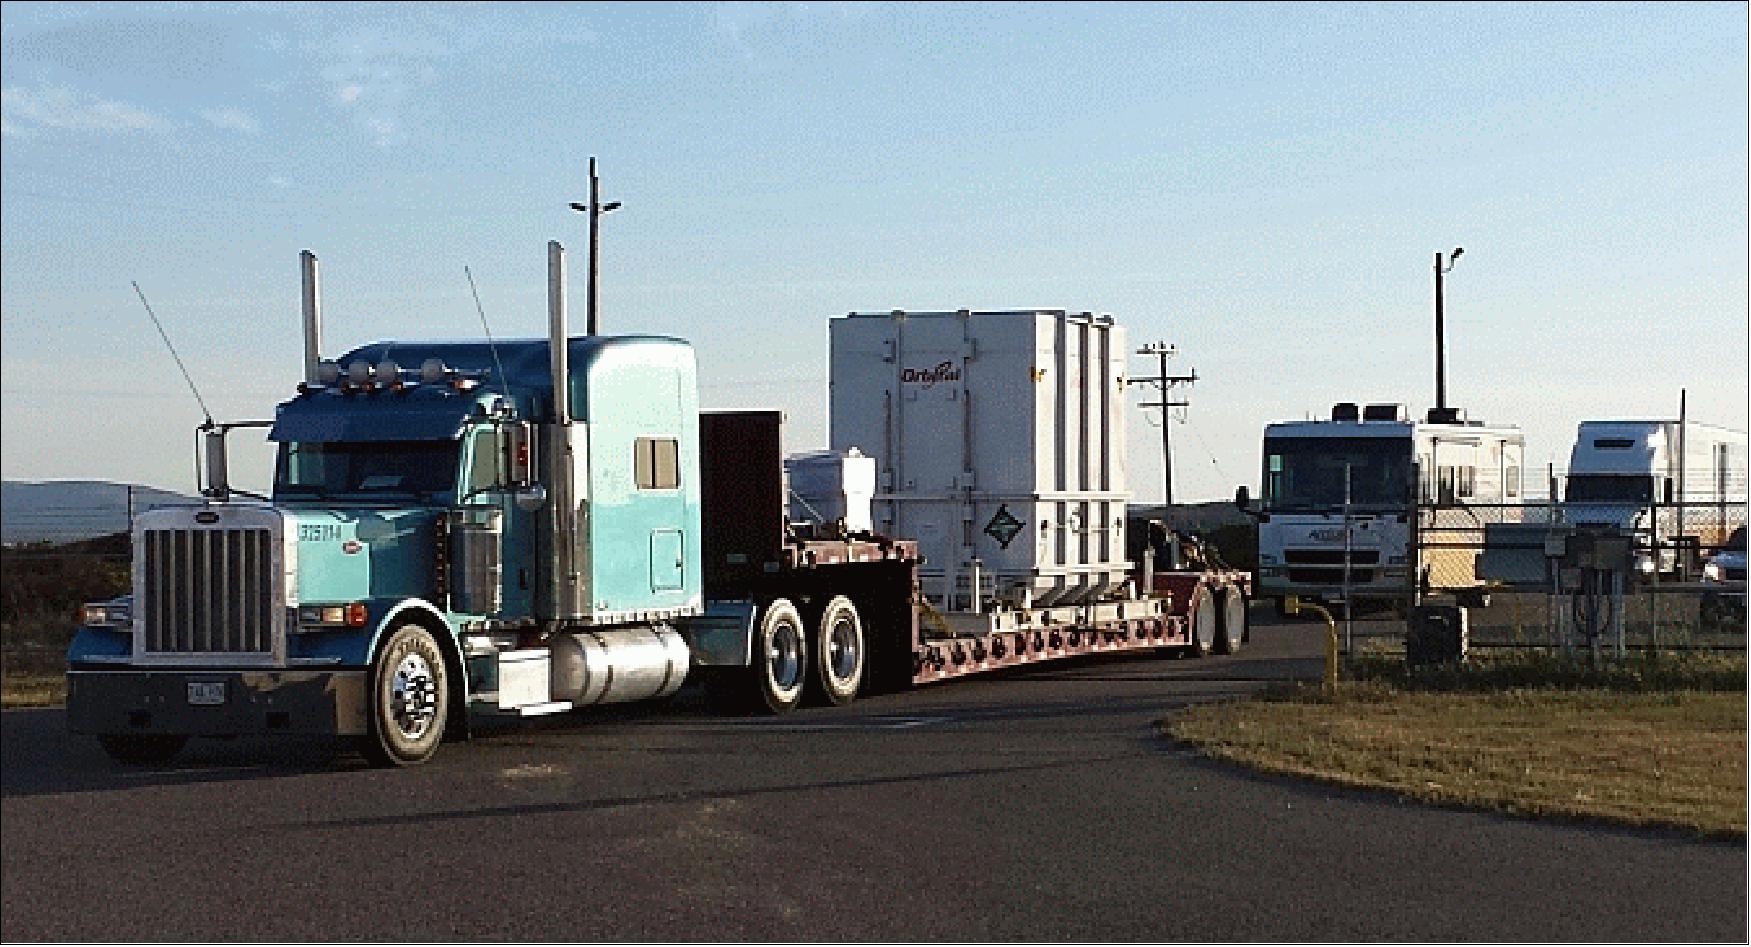 Figure 9: A truck convoy carrying NASA's Orbiting Carbon Observatory-2 spacecraft arrives at VAFB, CA (image credit: NASA)